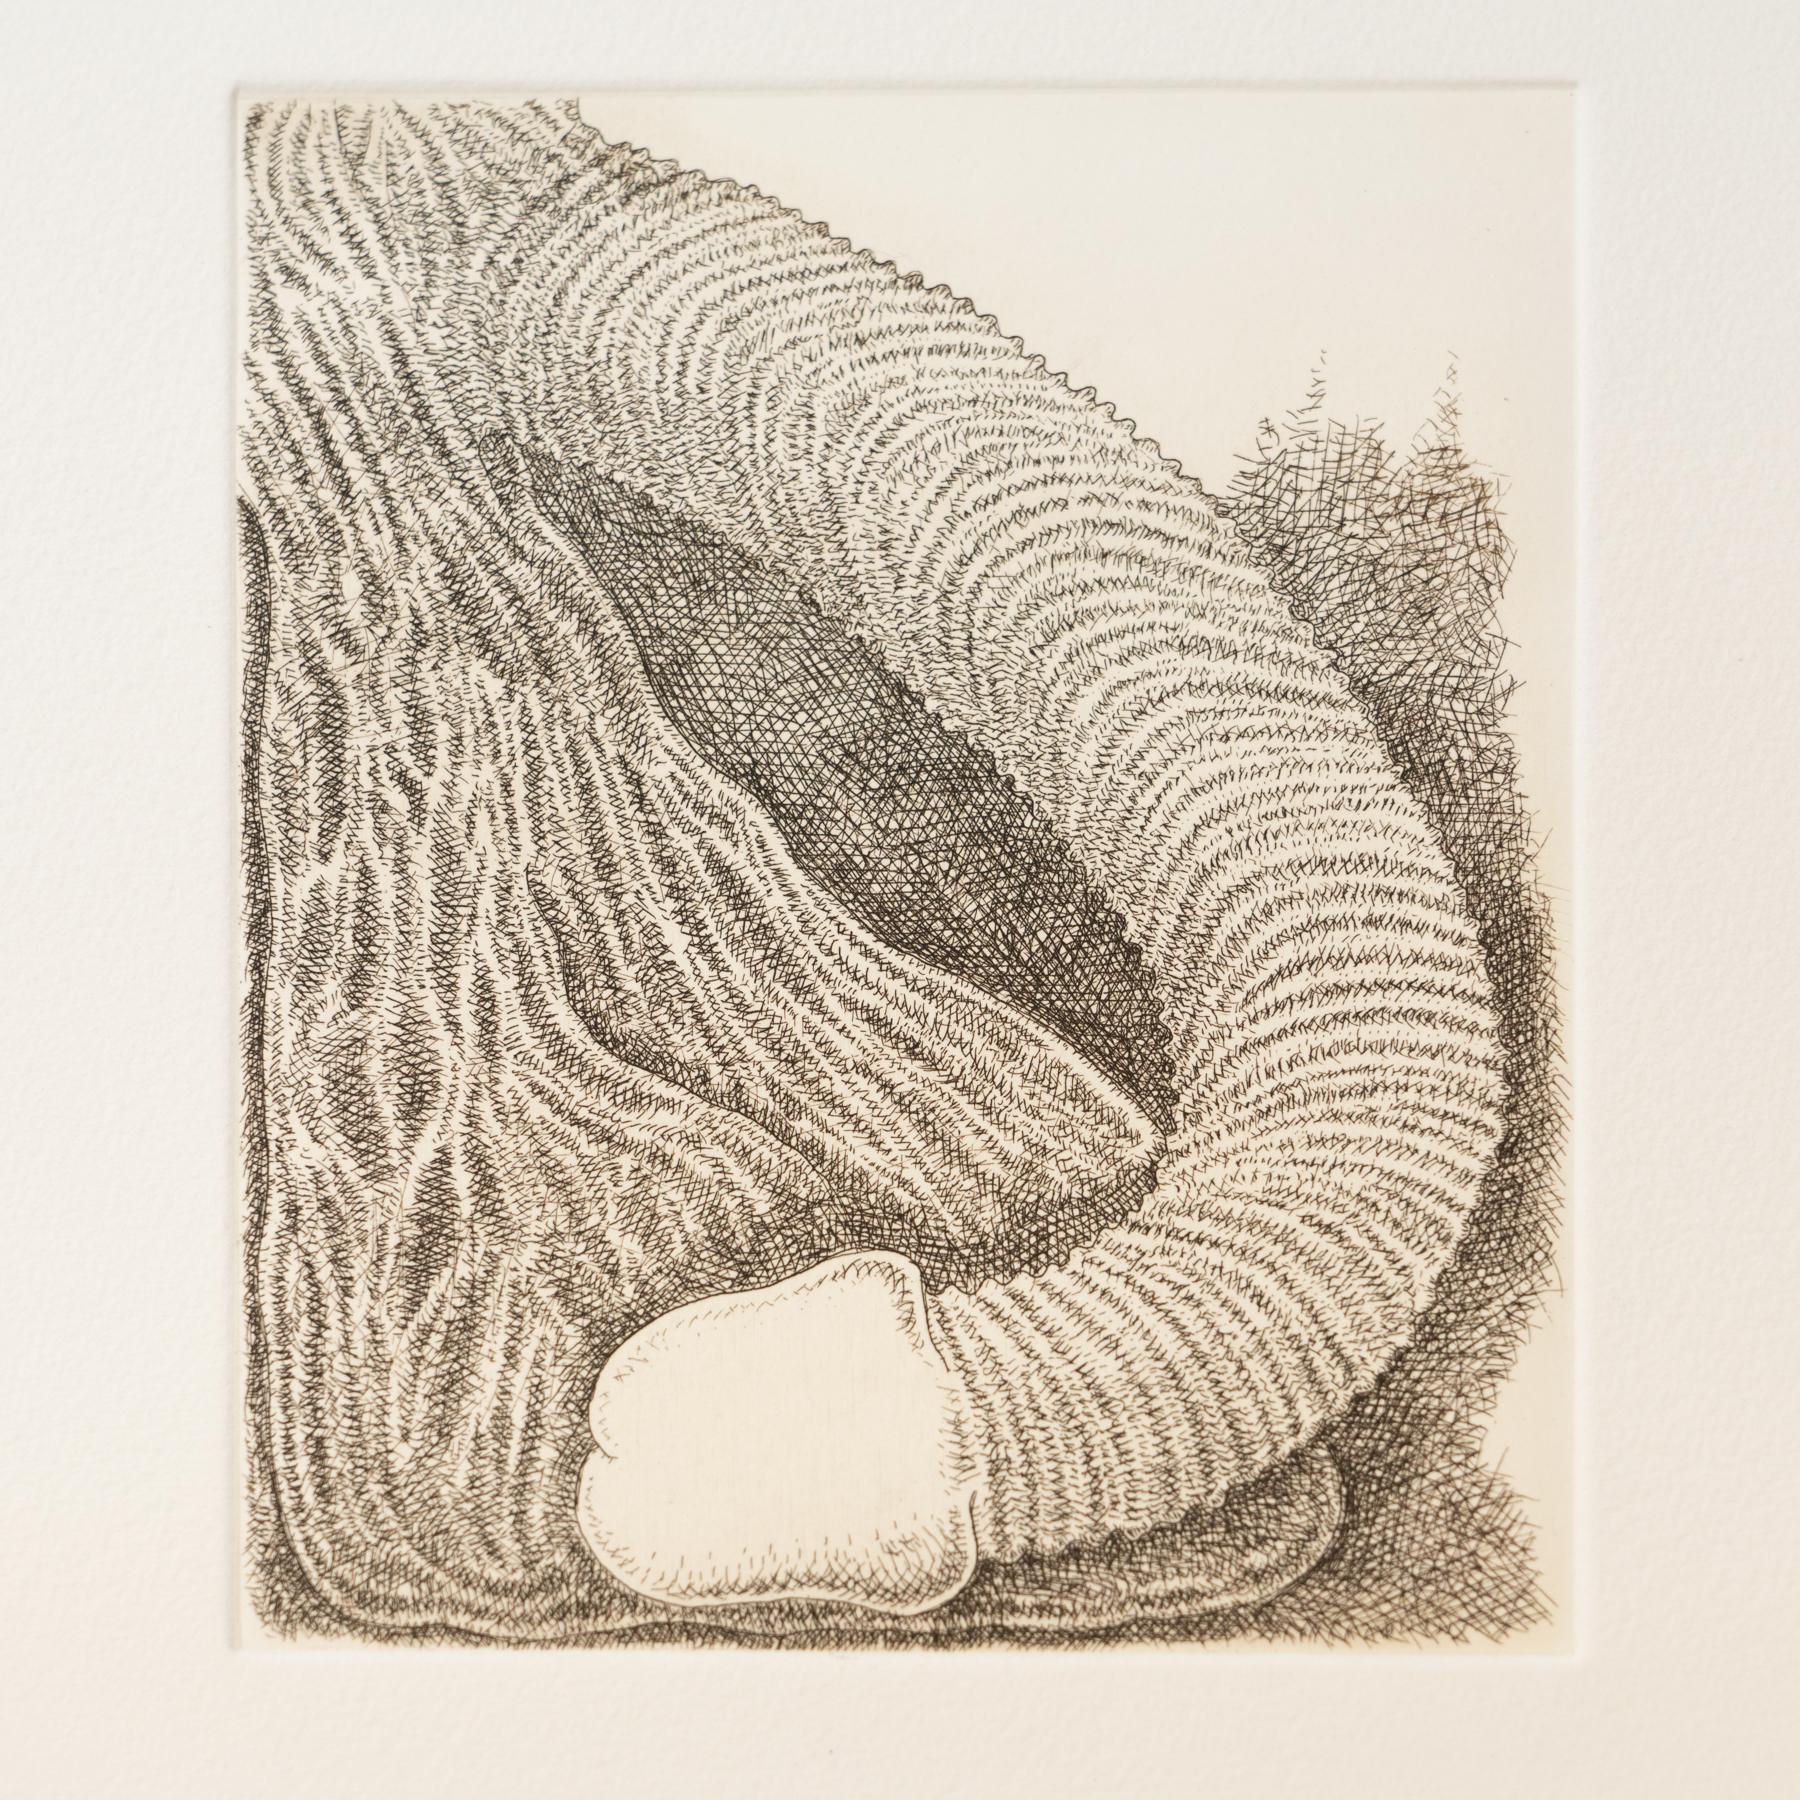 James Siena etching made 'Membre'. 

Made in Spain, circa 2011.

Unique edition, 1/1

Hand signed.

About the artist:
Responding to a set of parameters, what the artist calls “visual algorithms,” and following them to their conclusion,